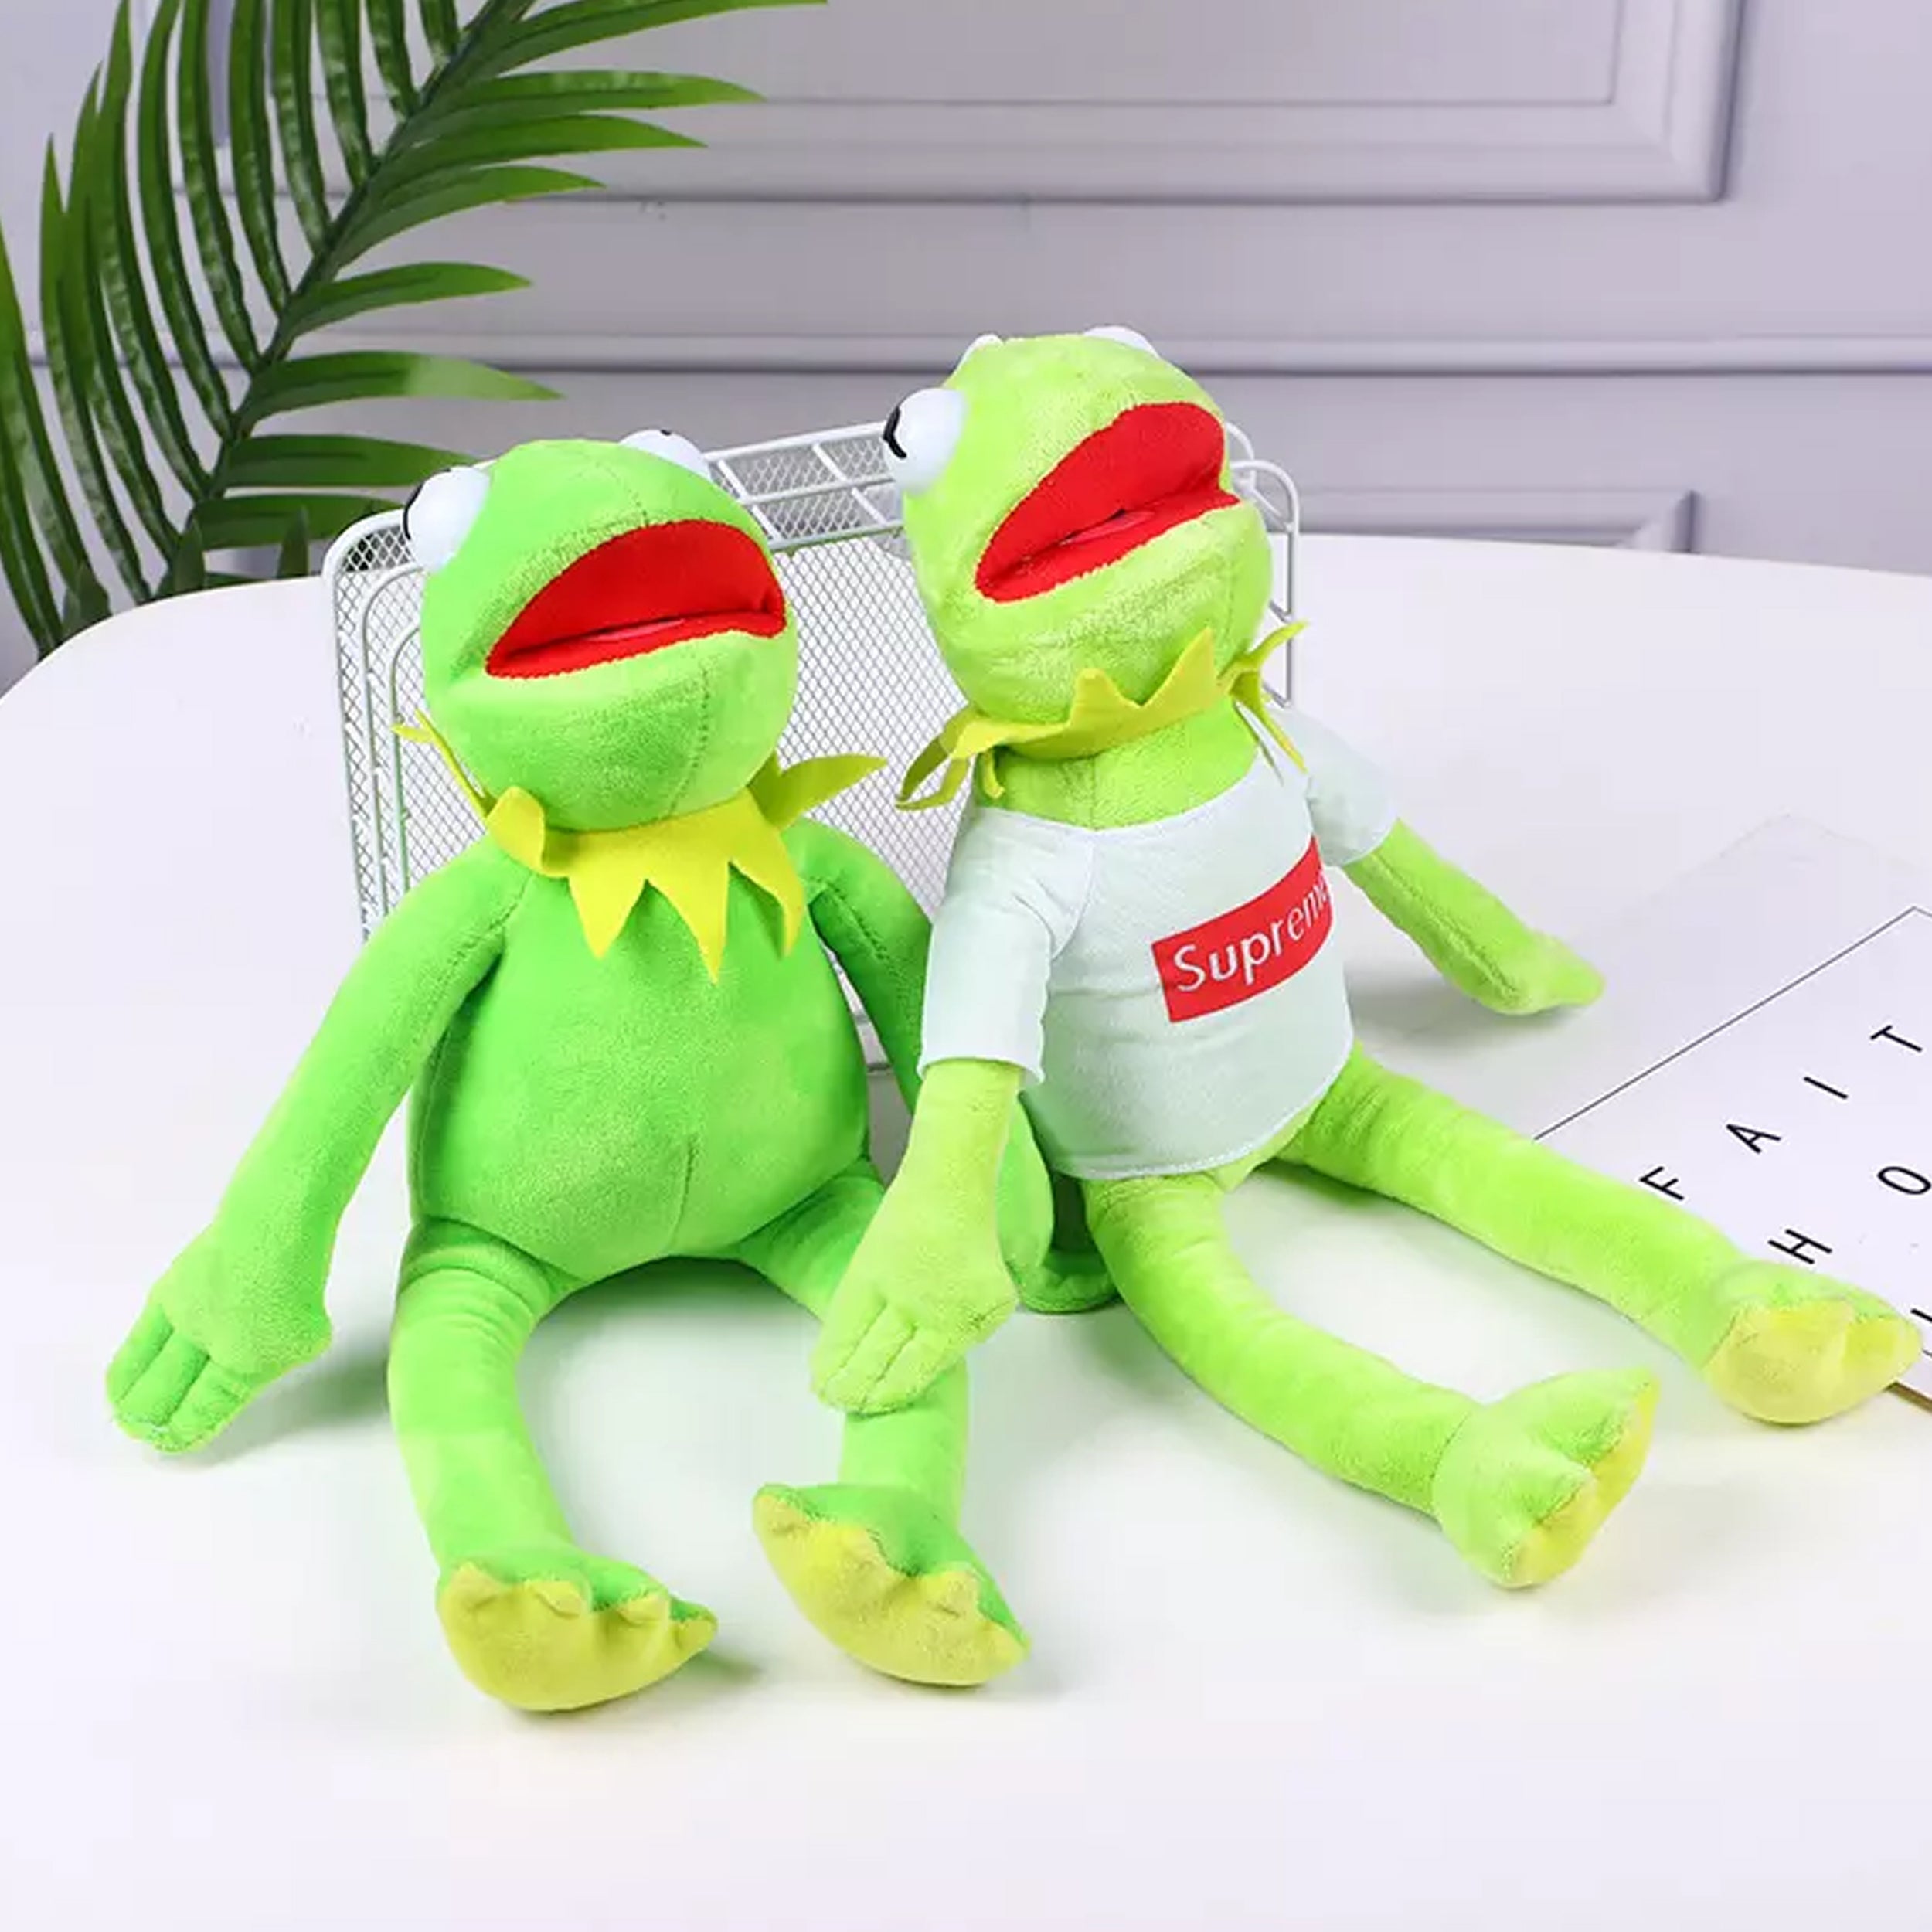 Hop into Fun with Our Green Stuffed Standing Frog Soft Toys for Kids